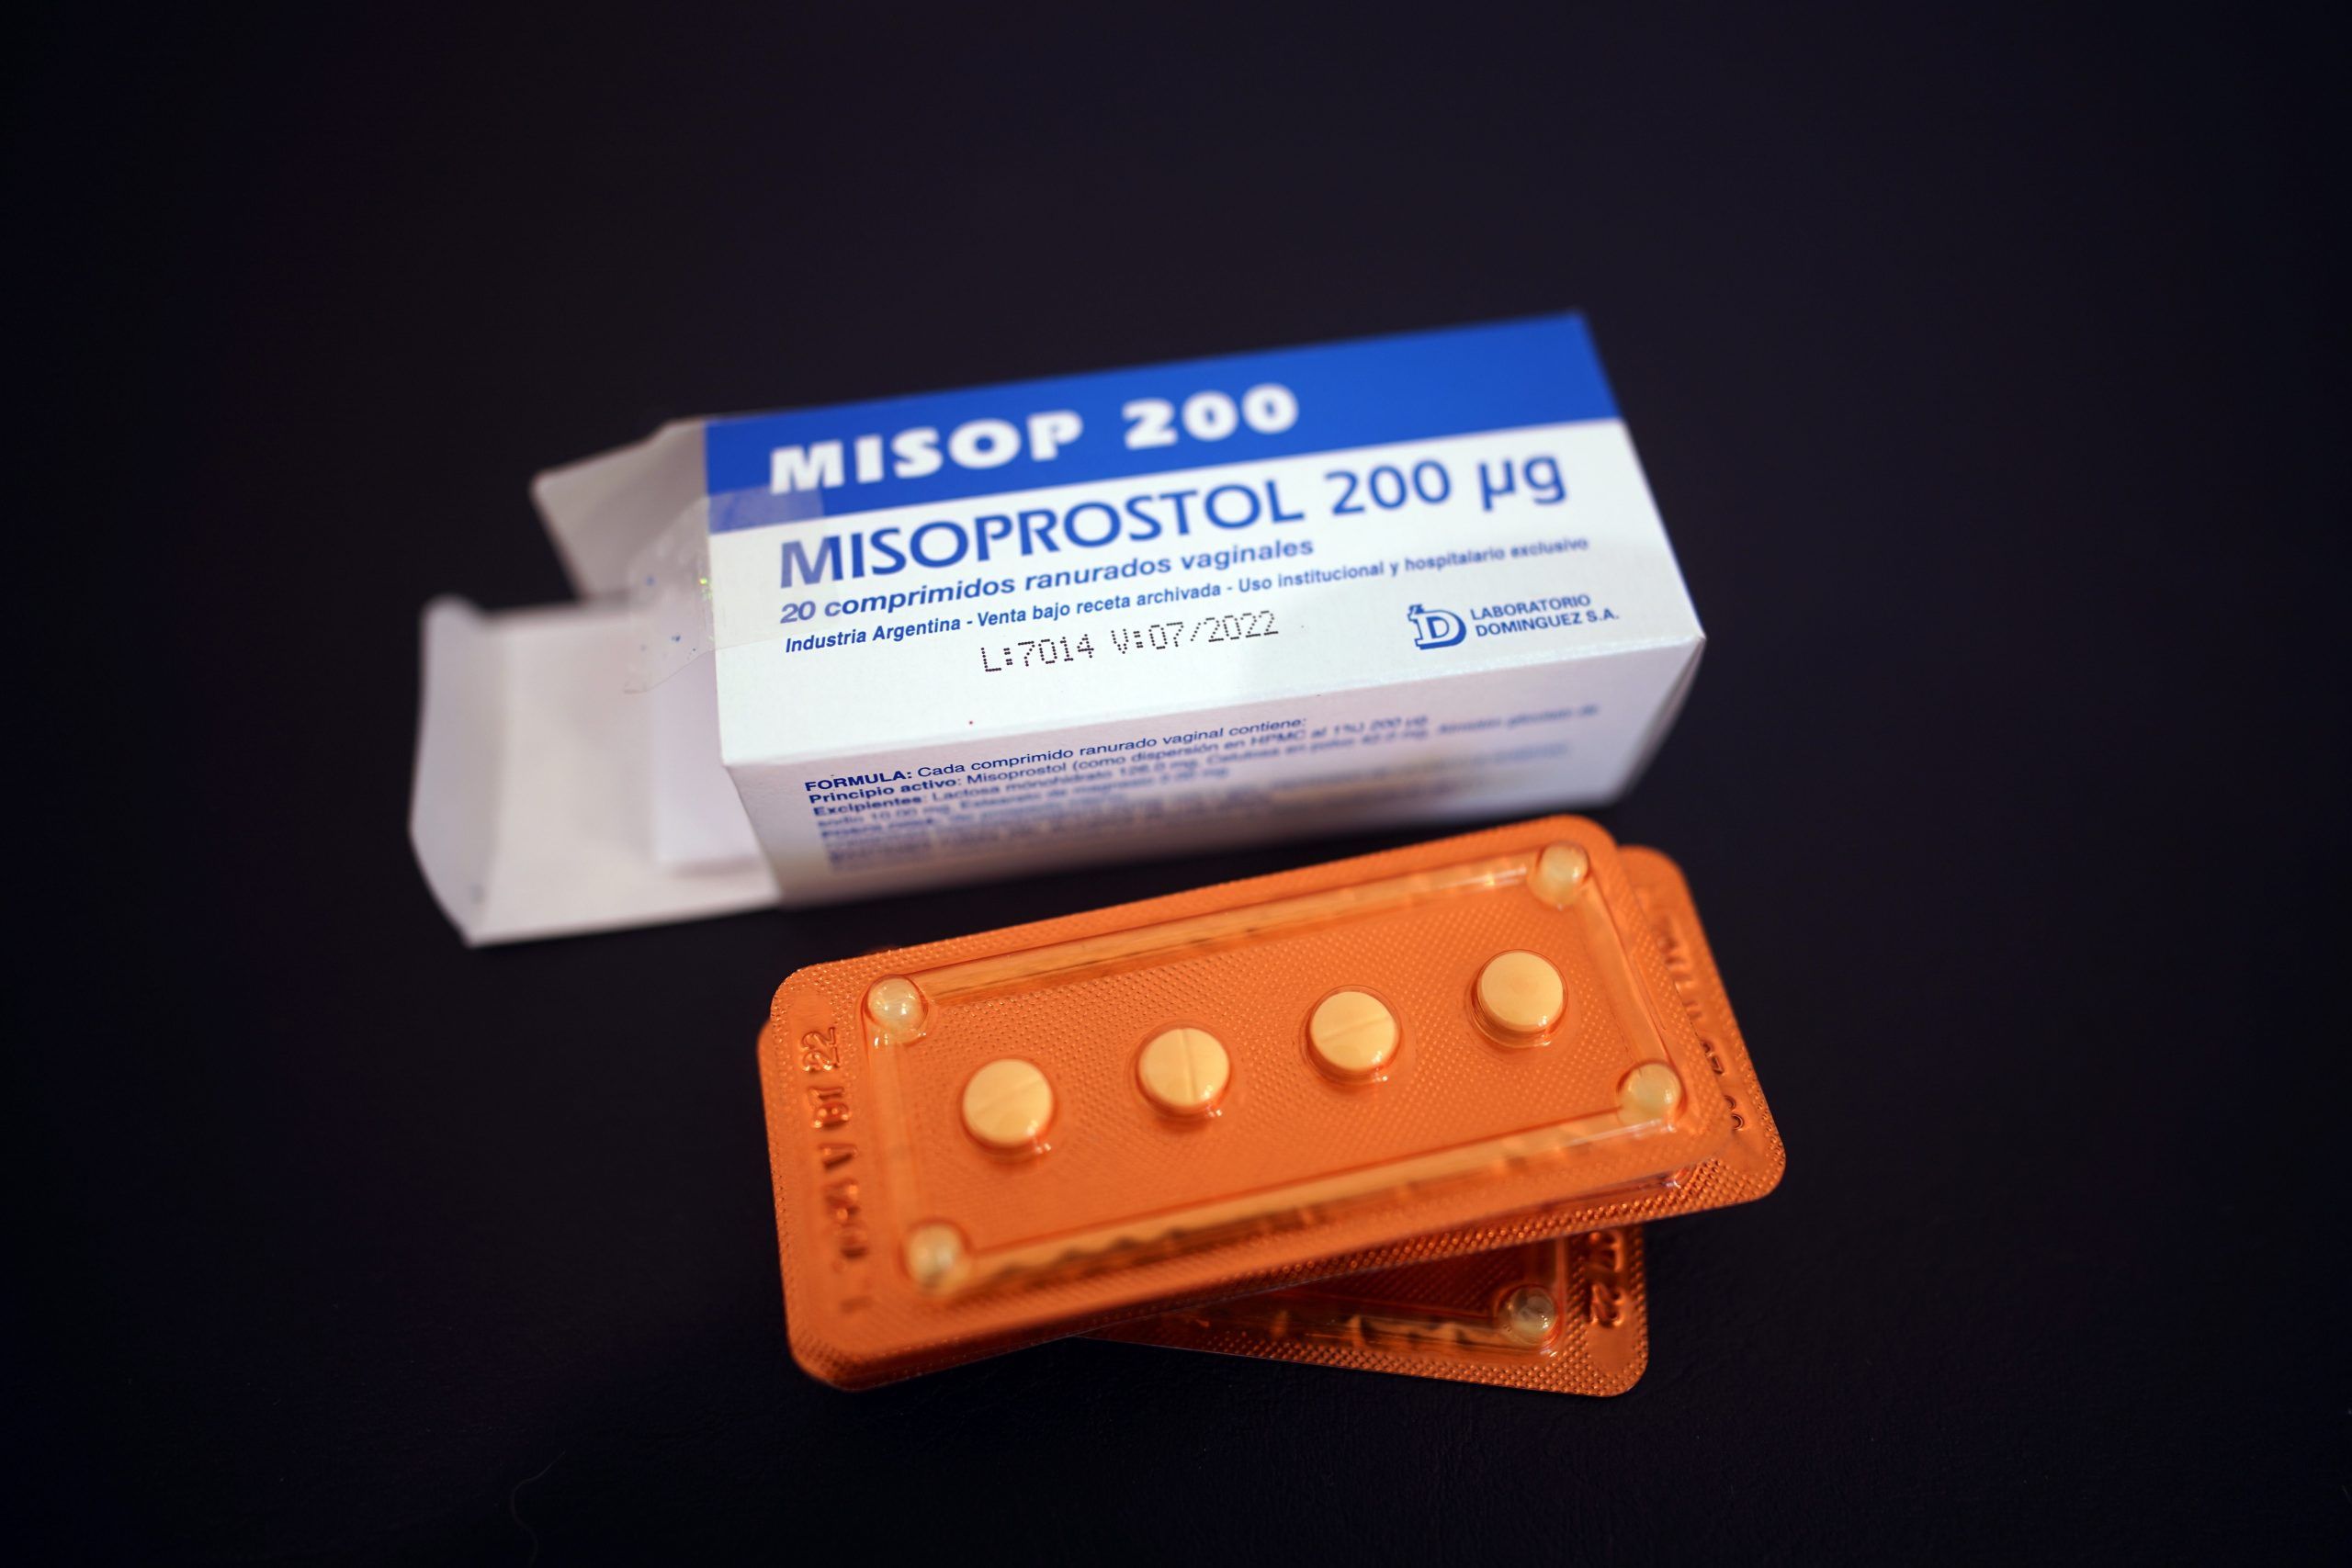 Misoprostol, a common abortion pill, sits on a gynecological table at Casa Fusa, a health center that advises women on reproductive issues and performs legal abortions in Buenos Aires, Argentina. THE CANADIAN PRESS/AP-Victor R. Caivano